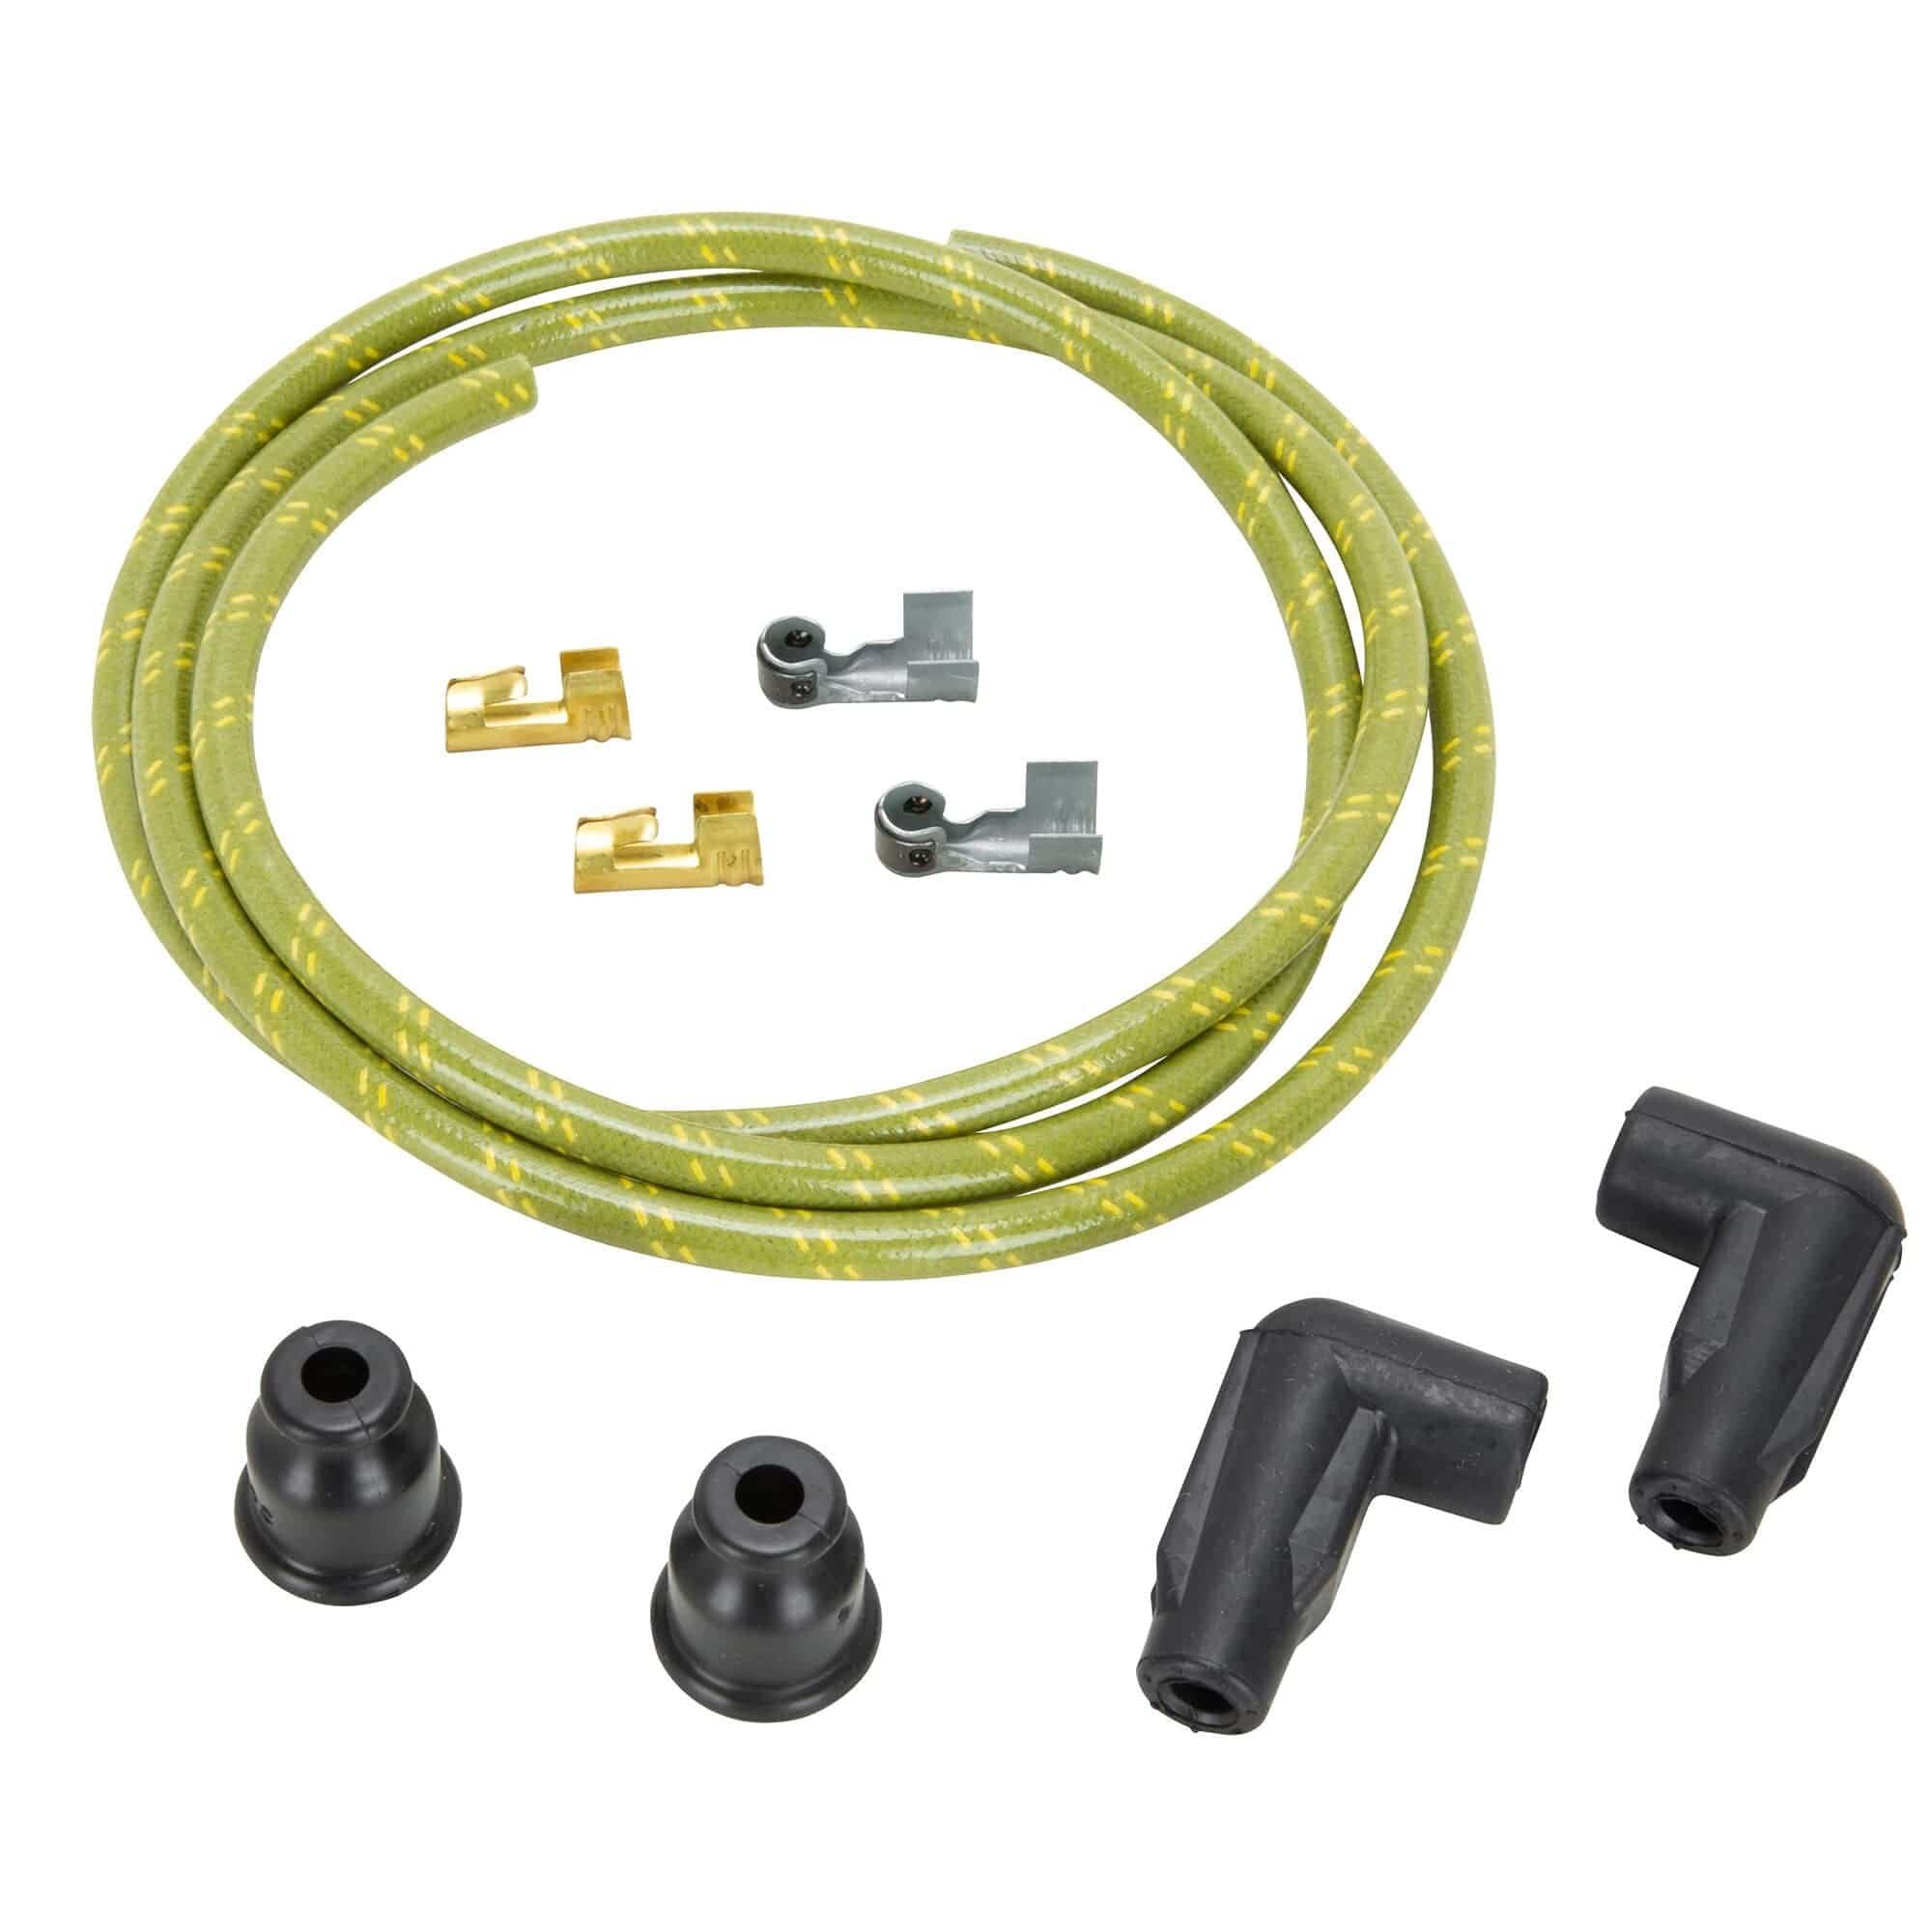 https://www.lowbrowcustoms.com/cdn/shop/products/010603-lowbrow-customs-7mm-solid-core-cloth-90-degree-spark-plug-wire-sets-green-with-yellow-tracers-1_d0123a39-af2a-4609-88f8-4ce6949a2a32_2000x.jpg?v=1622525145